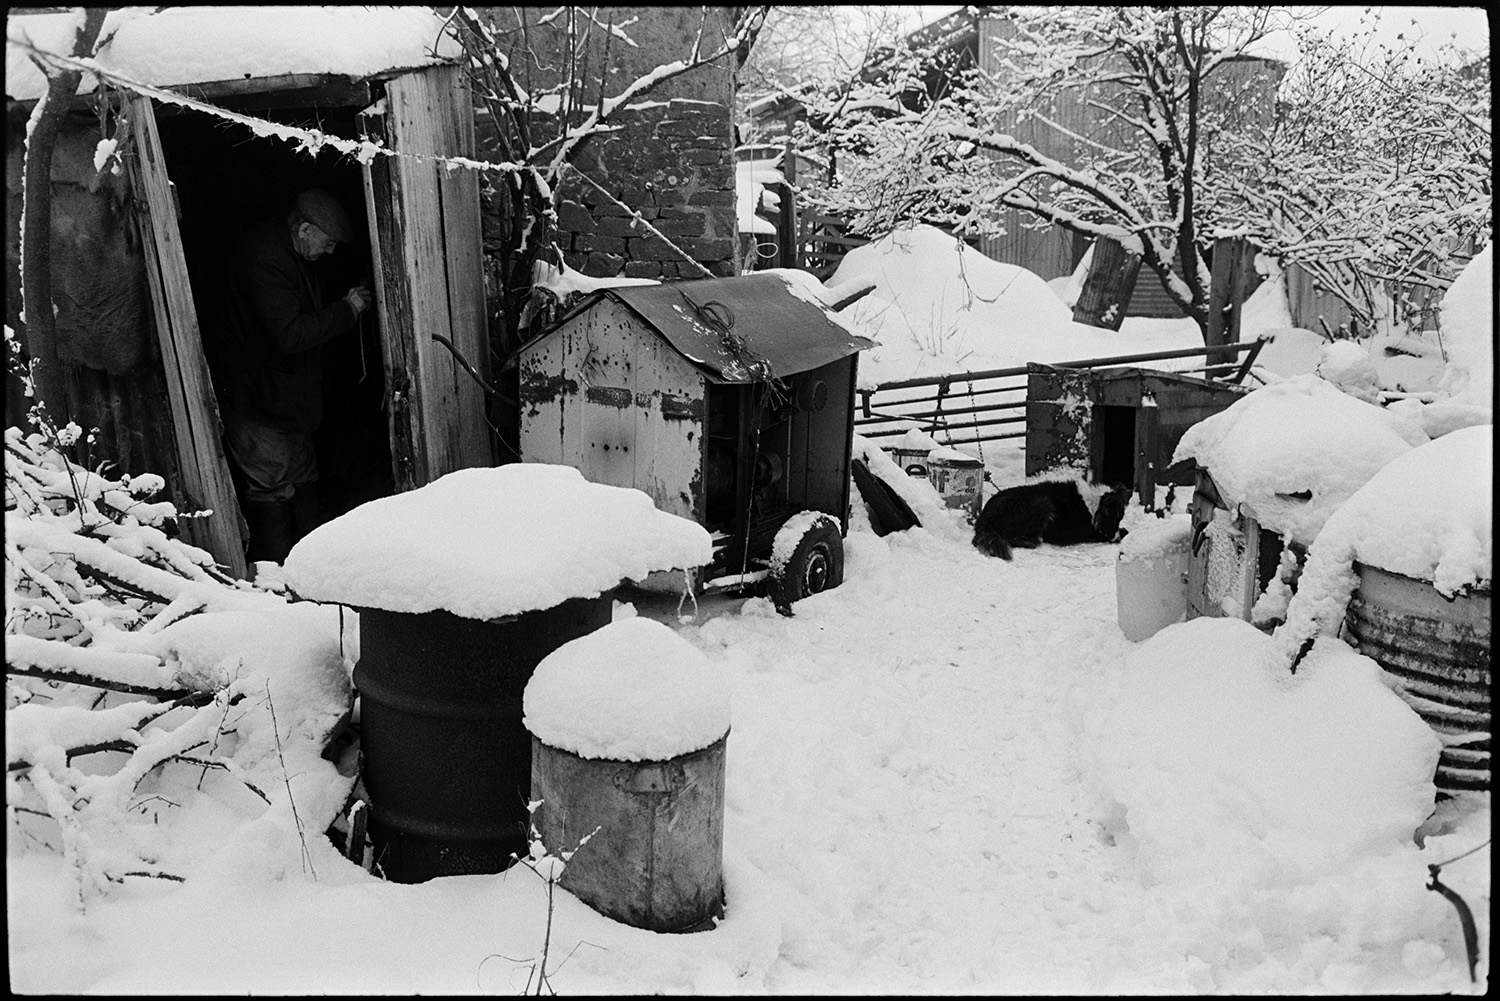 Snow, farmyard poultry, goats and dogs. Tractor and collapsing corrugated iron sheds.
[The snow covered farmyard with a generator on wheels, alongside a dog sitting by a kennel at Cuppers Piece, Beaford. There is a metal gate, oil drums, bins and Cyril Bennett can be seen in an open shed door. Sheds and snow covered trees are visible in the background.]